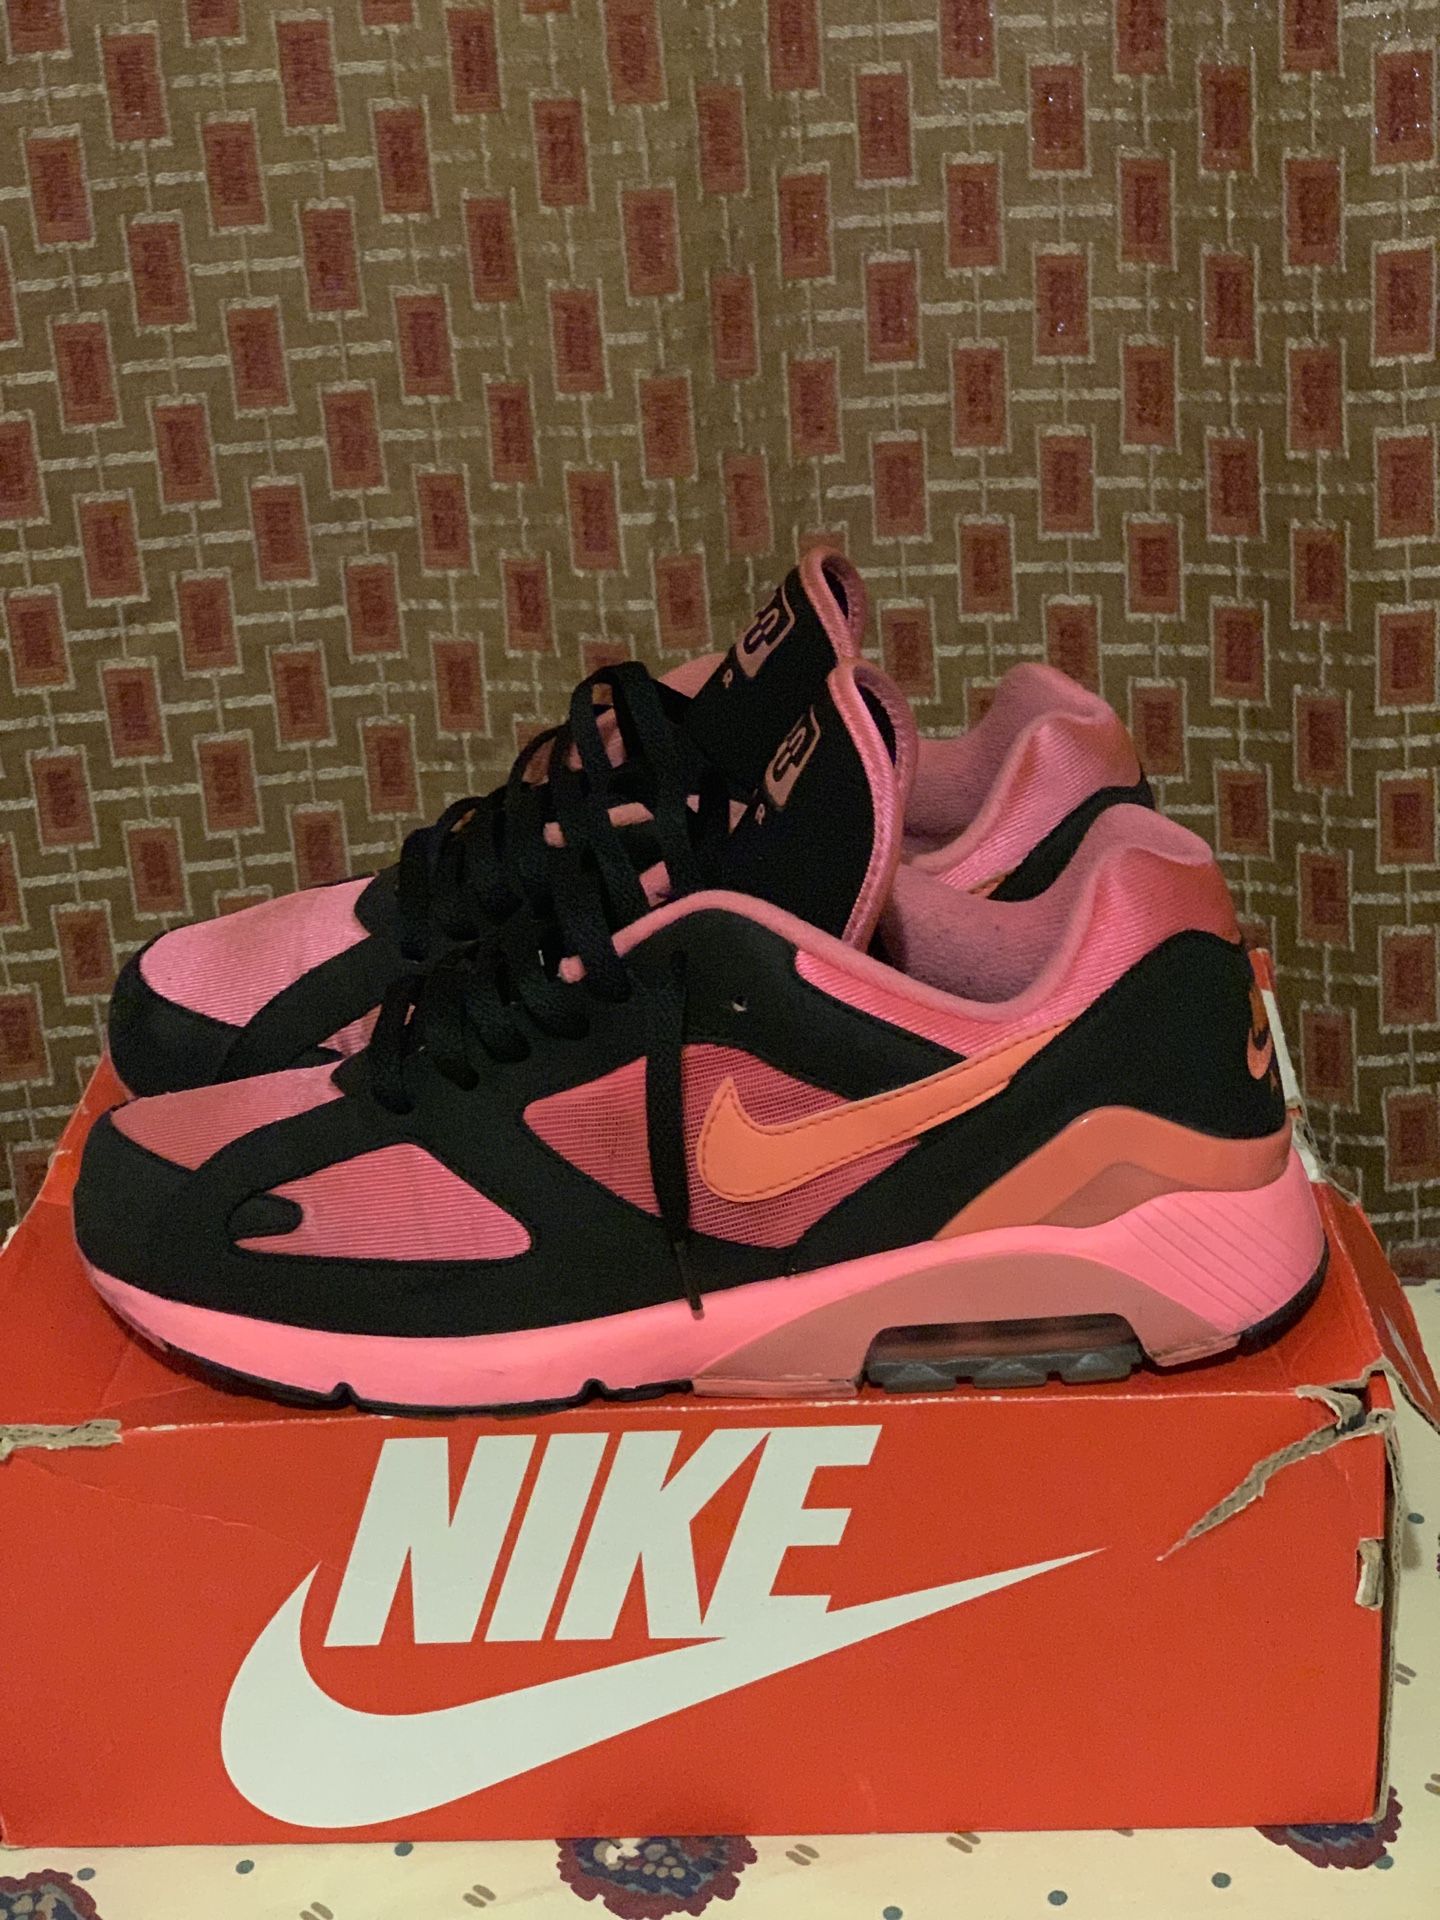 Nike air max 180 “Comme des Garcons” (cdg)